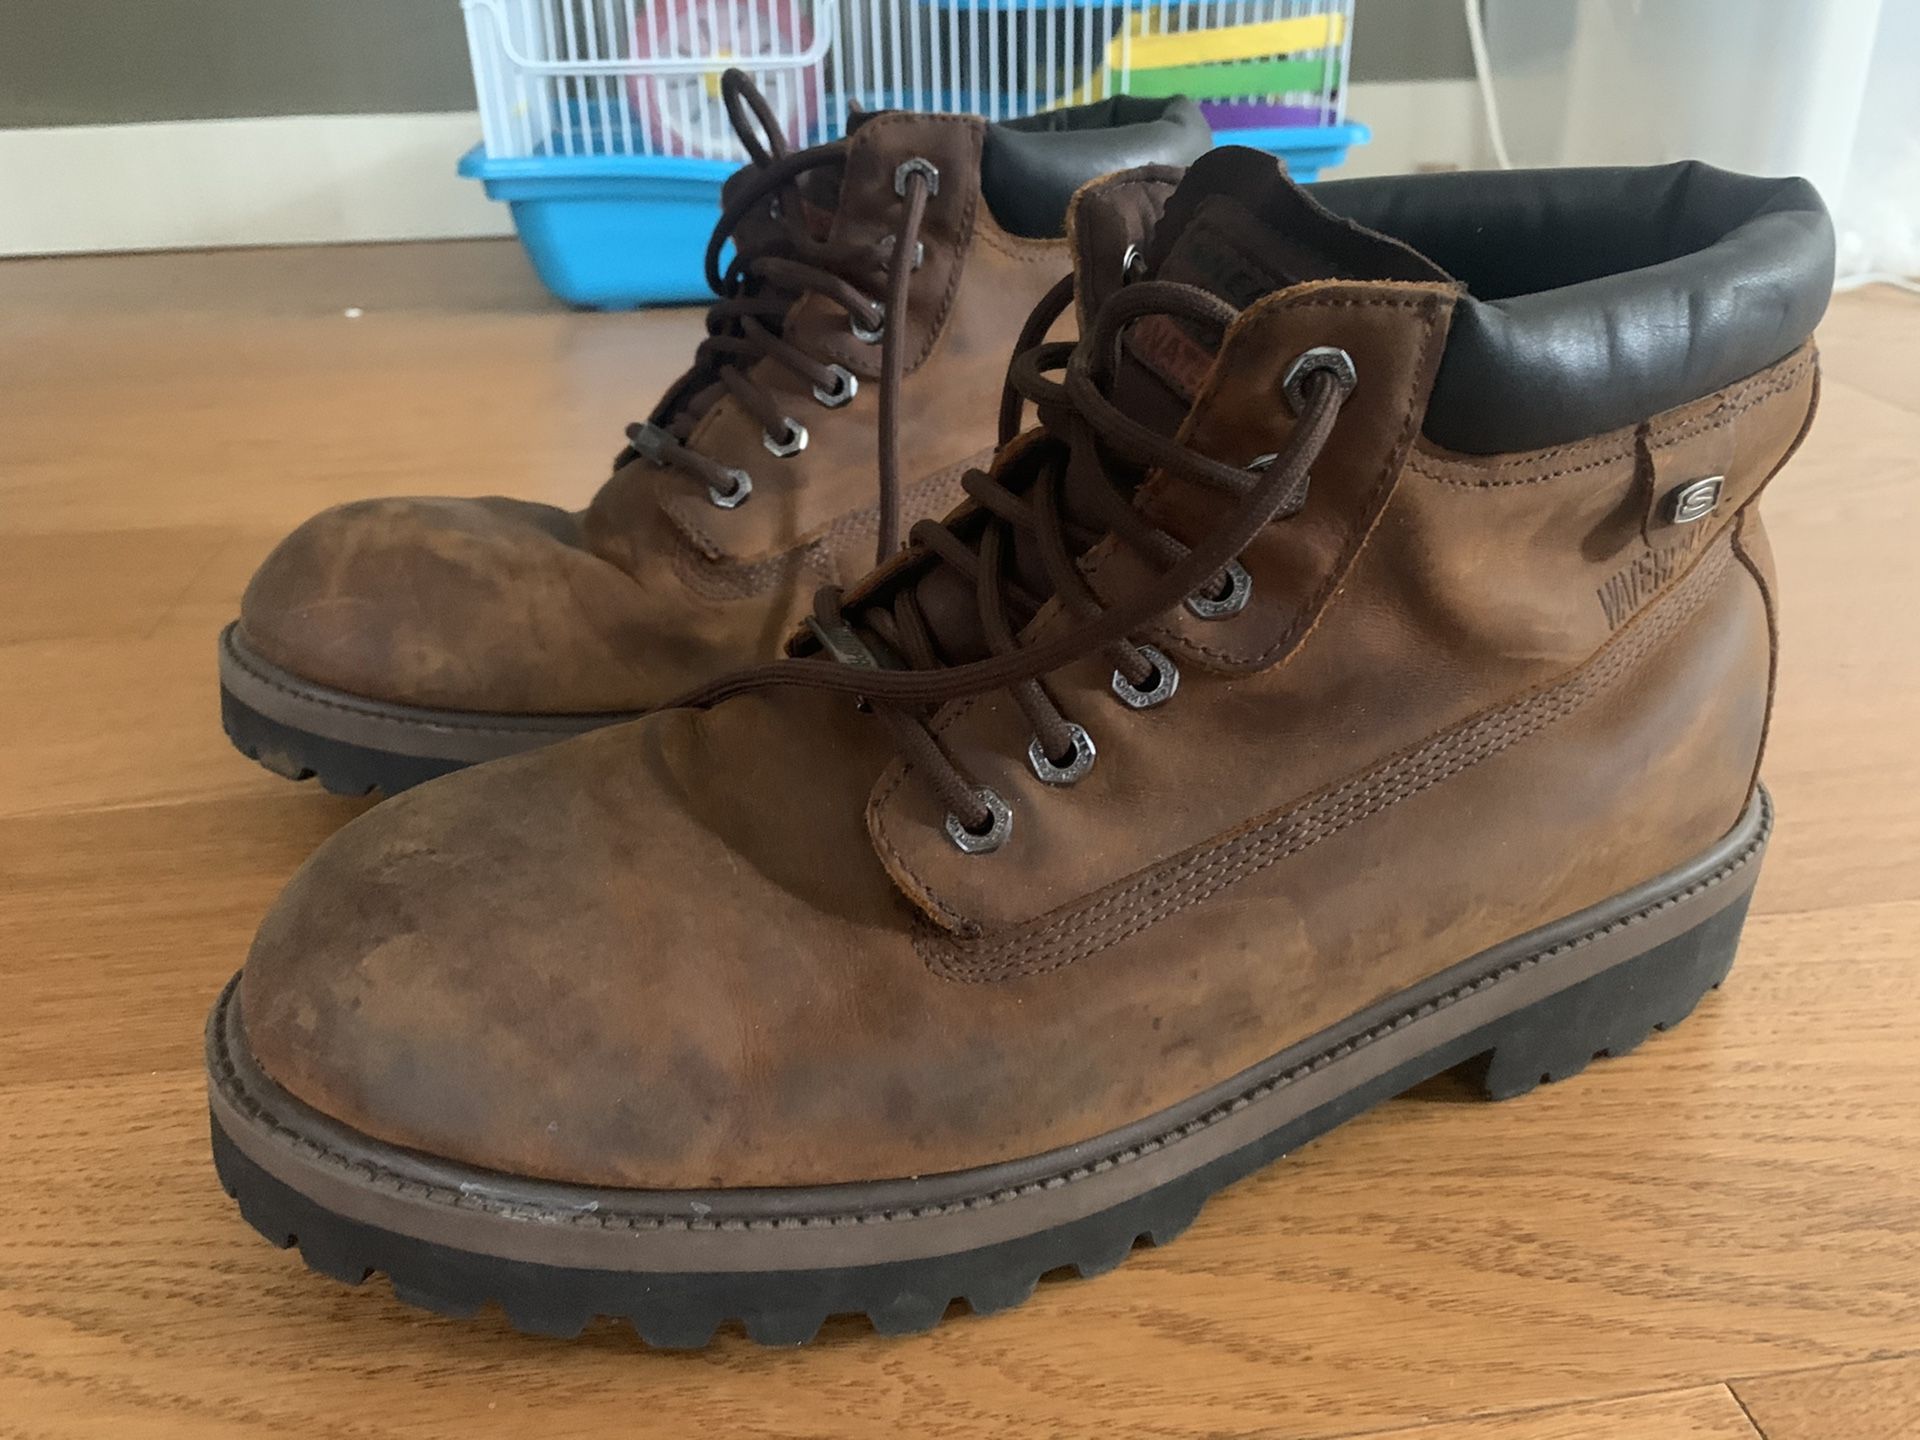 Skechers your work boots size 12